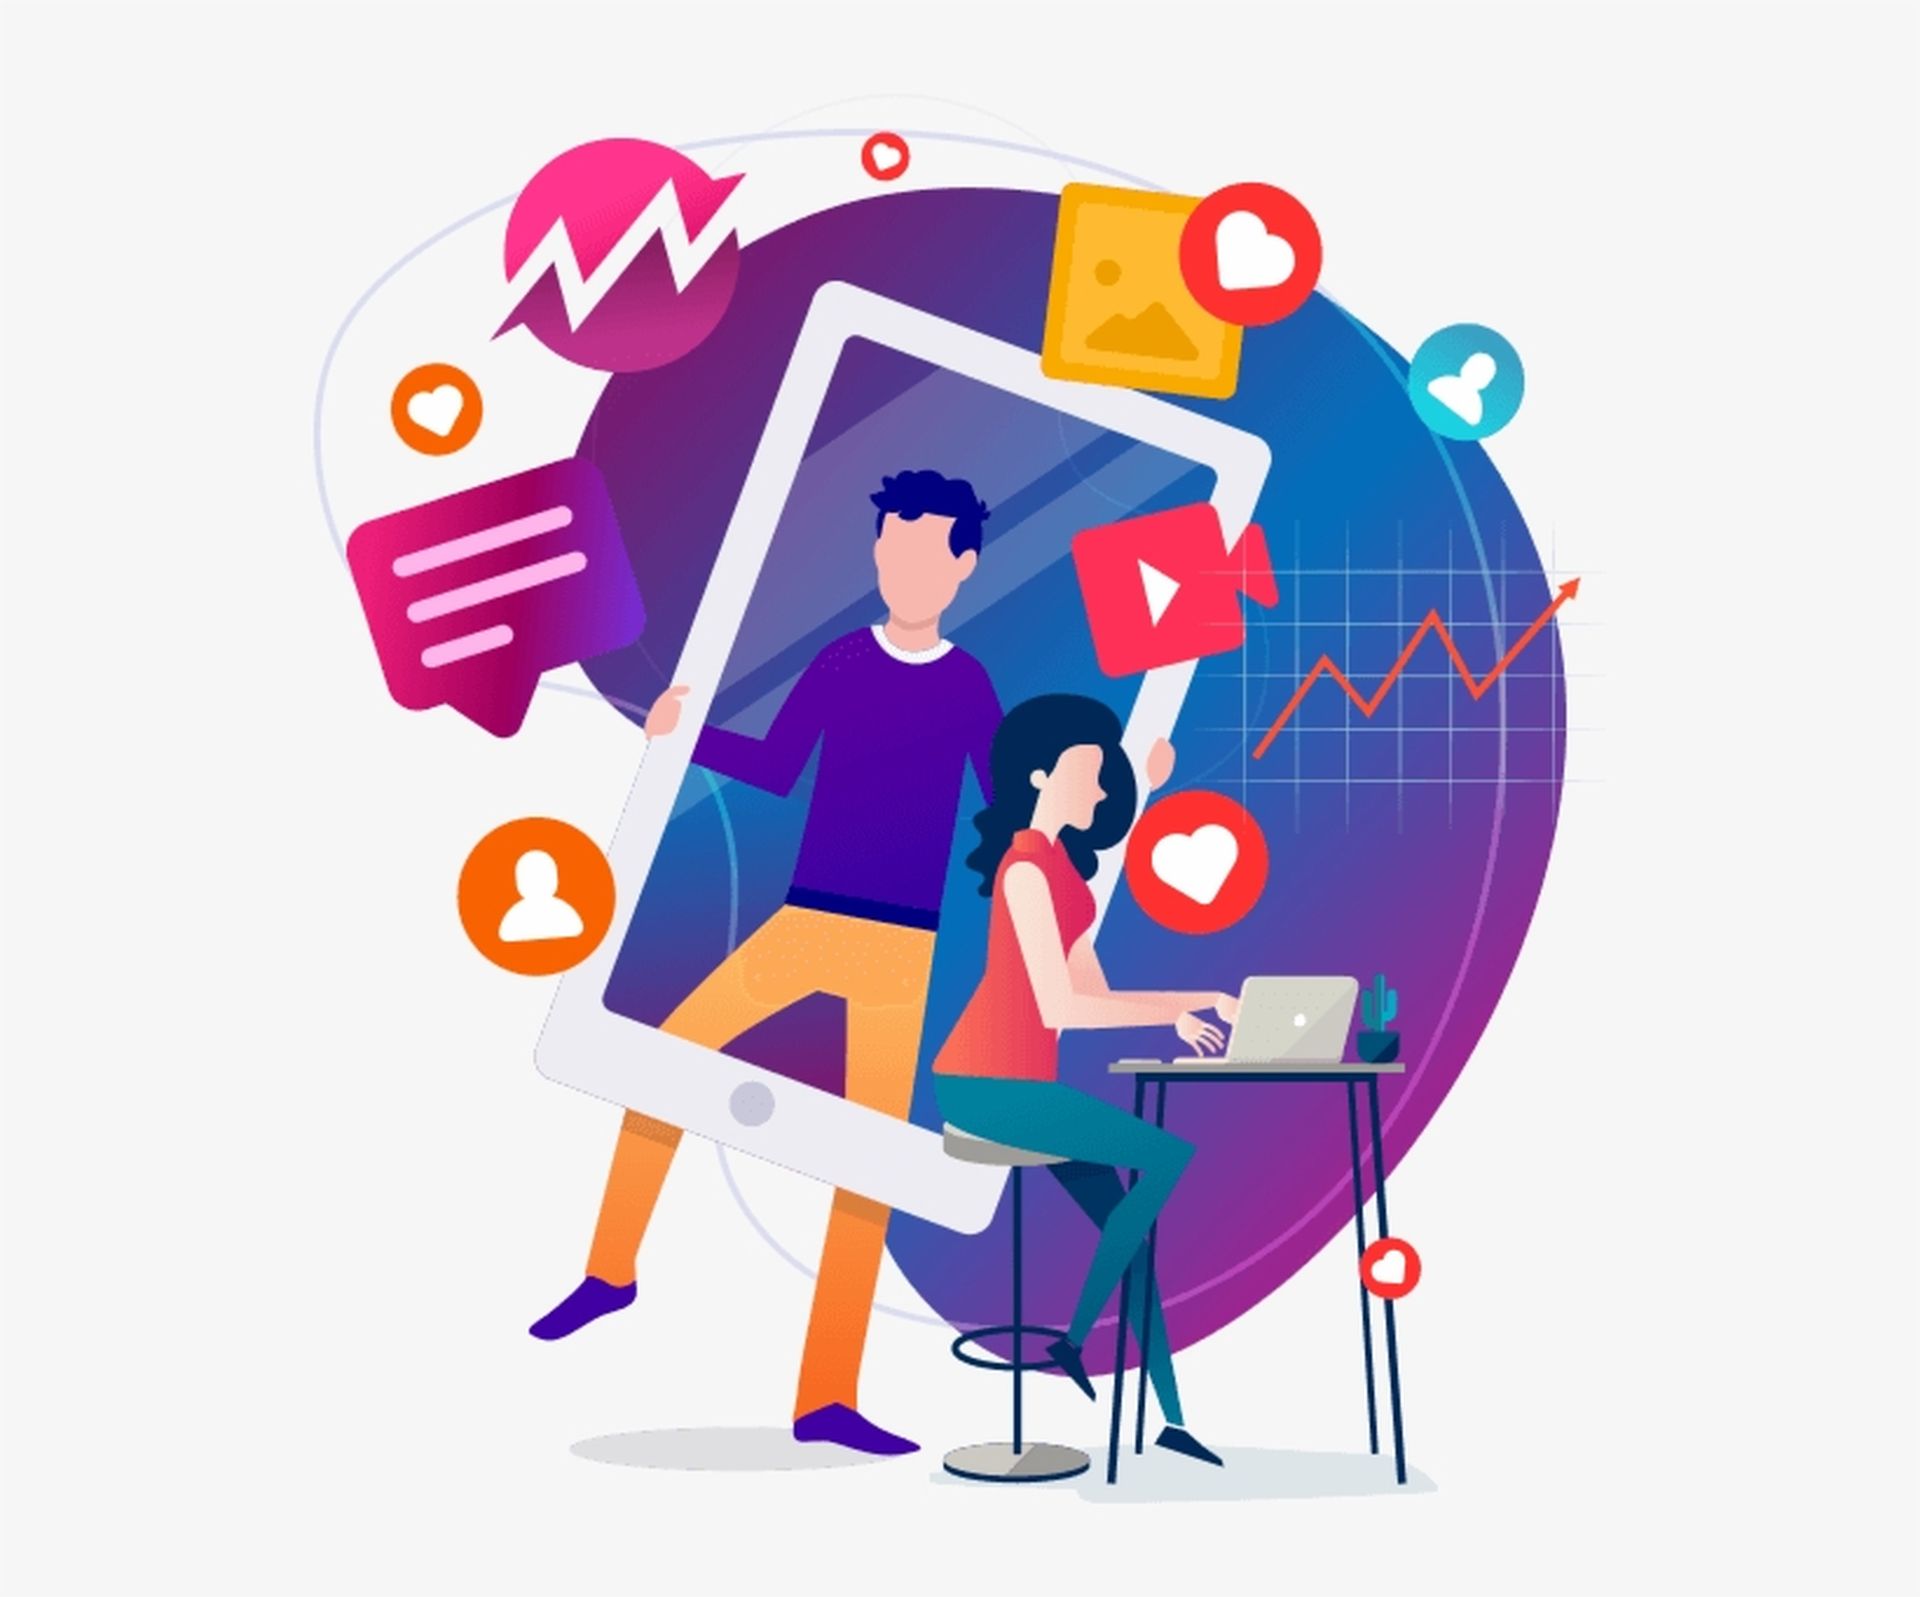 In this article, we are going to be covering how to grab attention on social media, whether it is on Facebook, Instagram, Twitter, or any other platform.